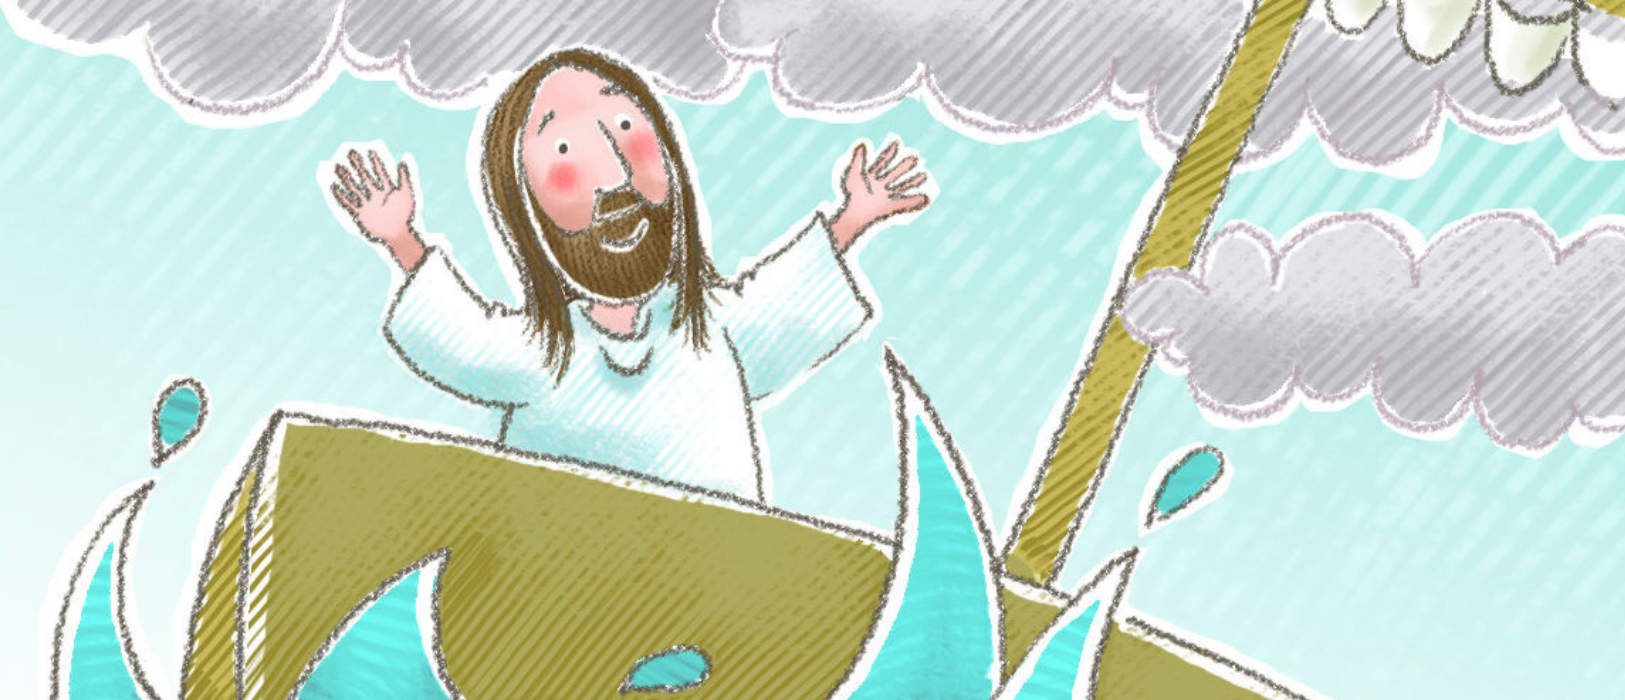 Sunday School Lesson: Jesus Calms the Storm on the Sea of Galilee